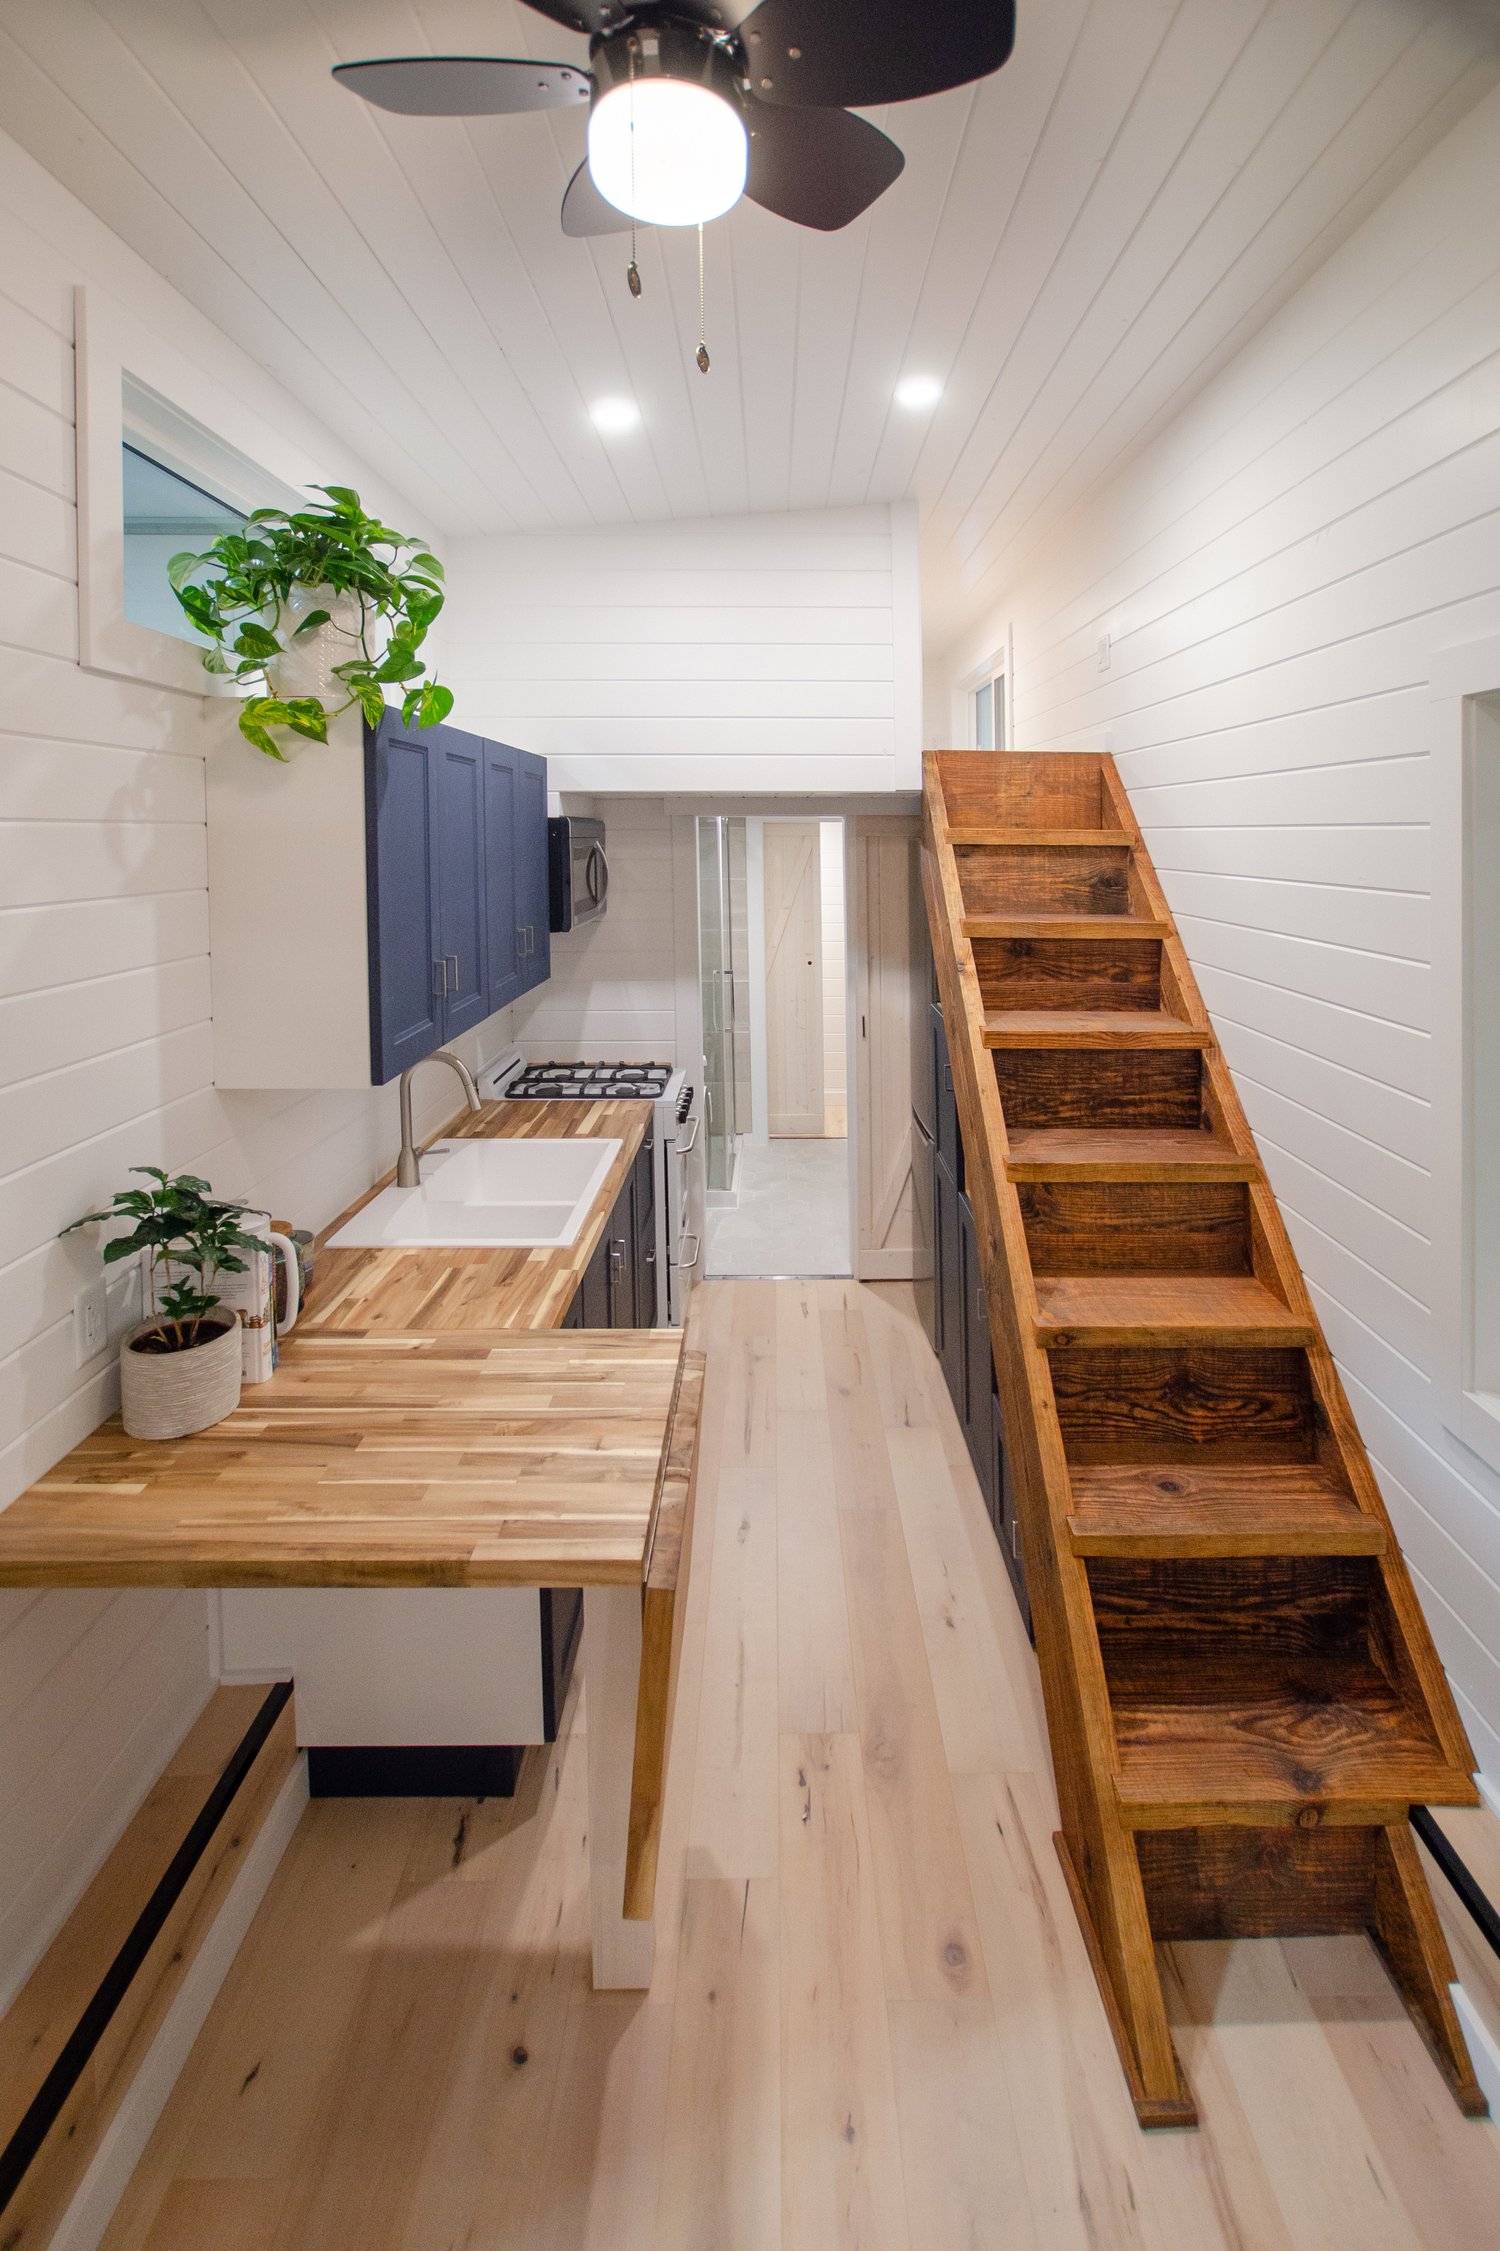 Kitchen And Loft Stairs - Salish Sea by Rewild Homes